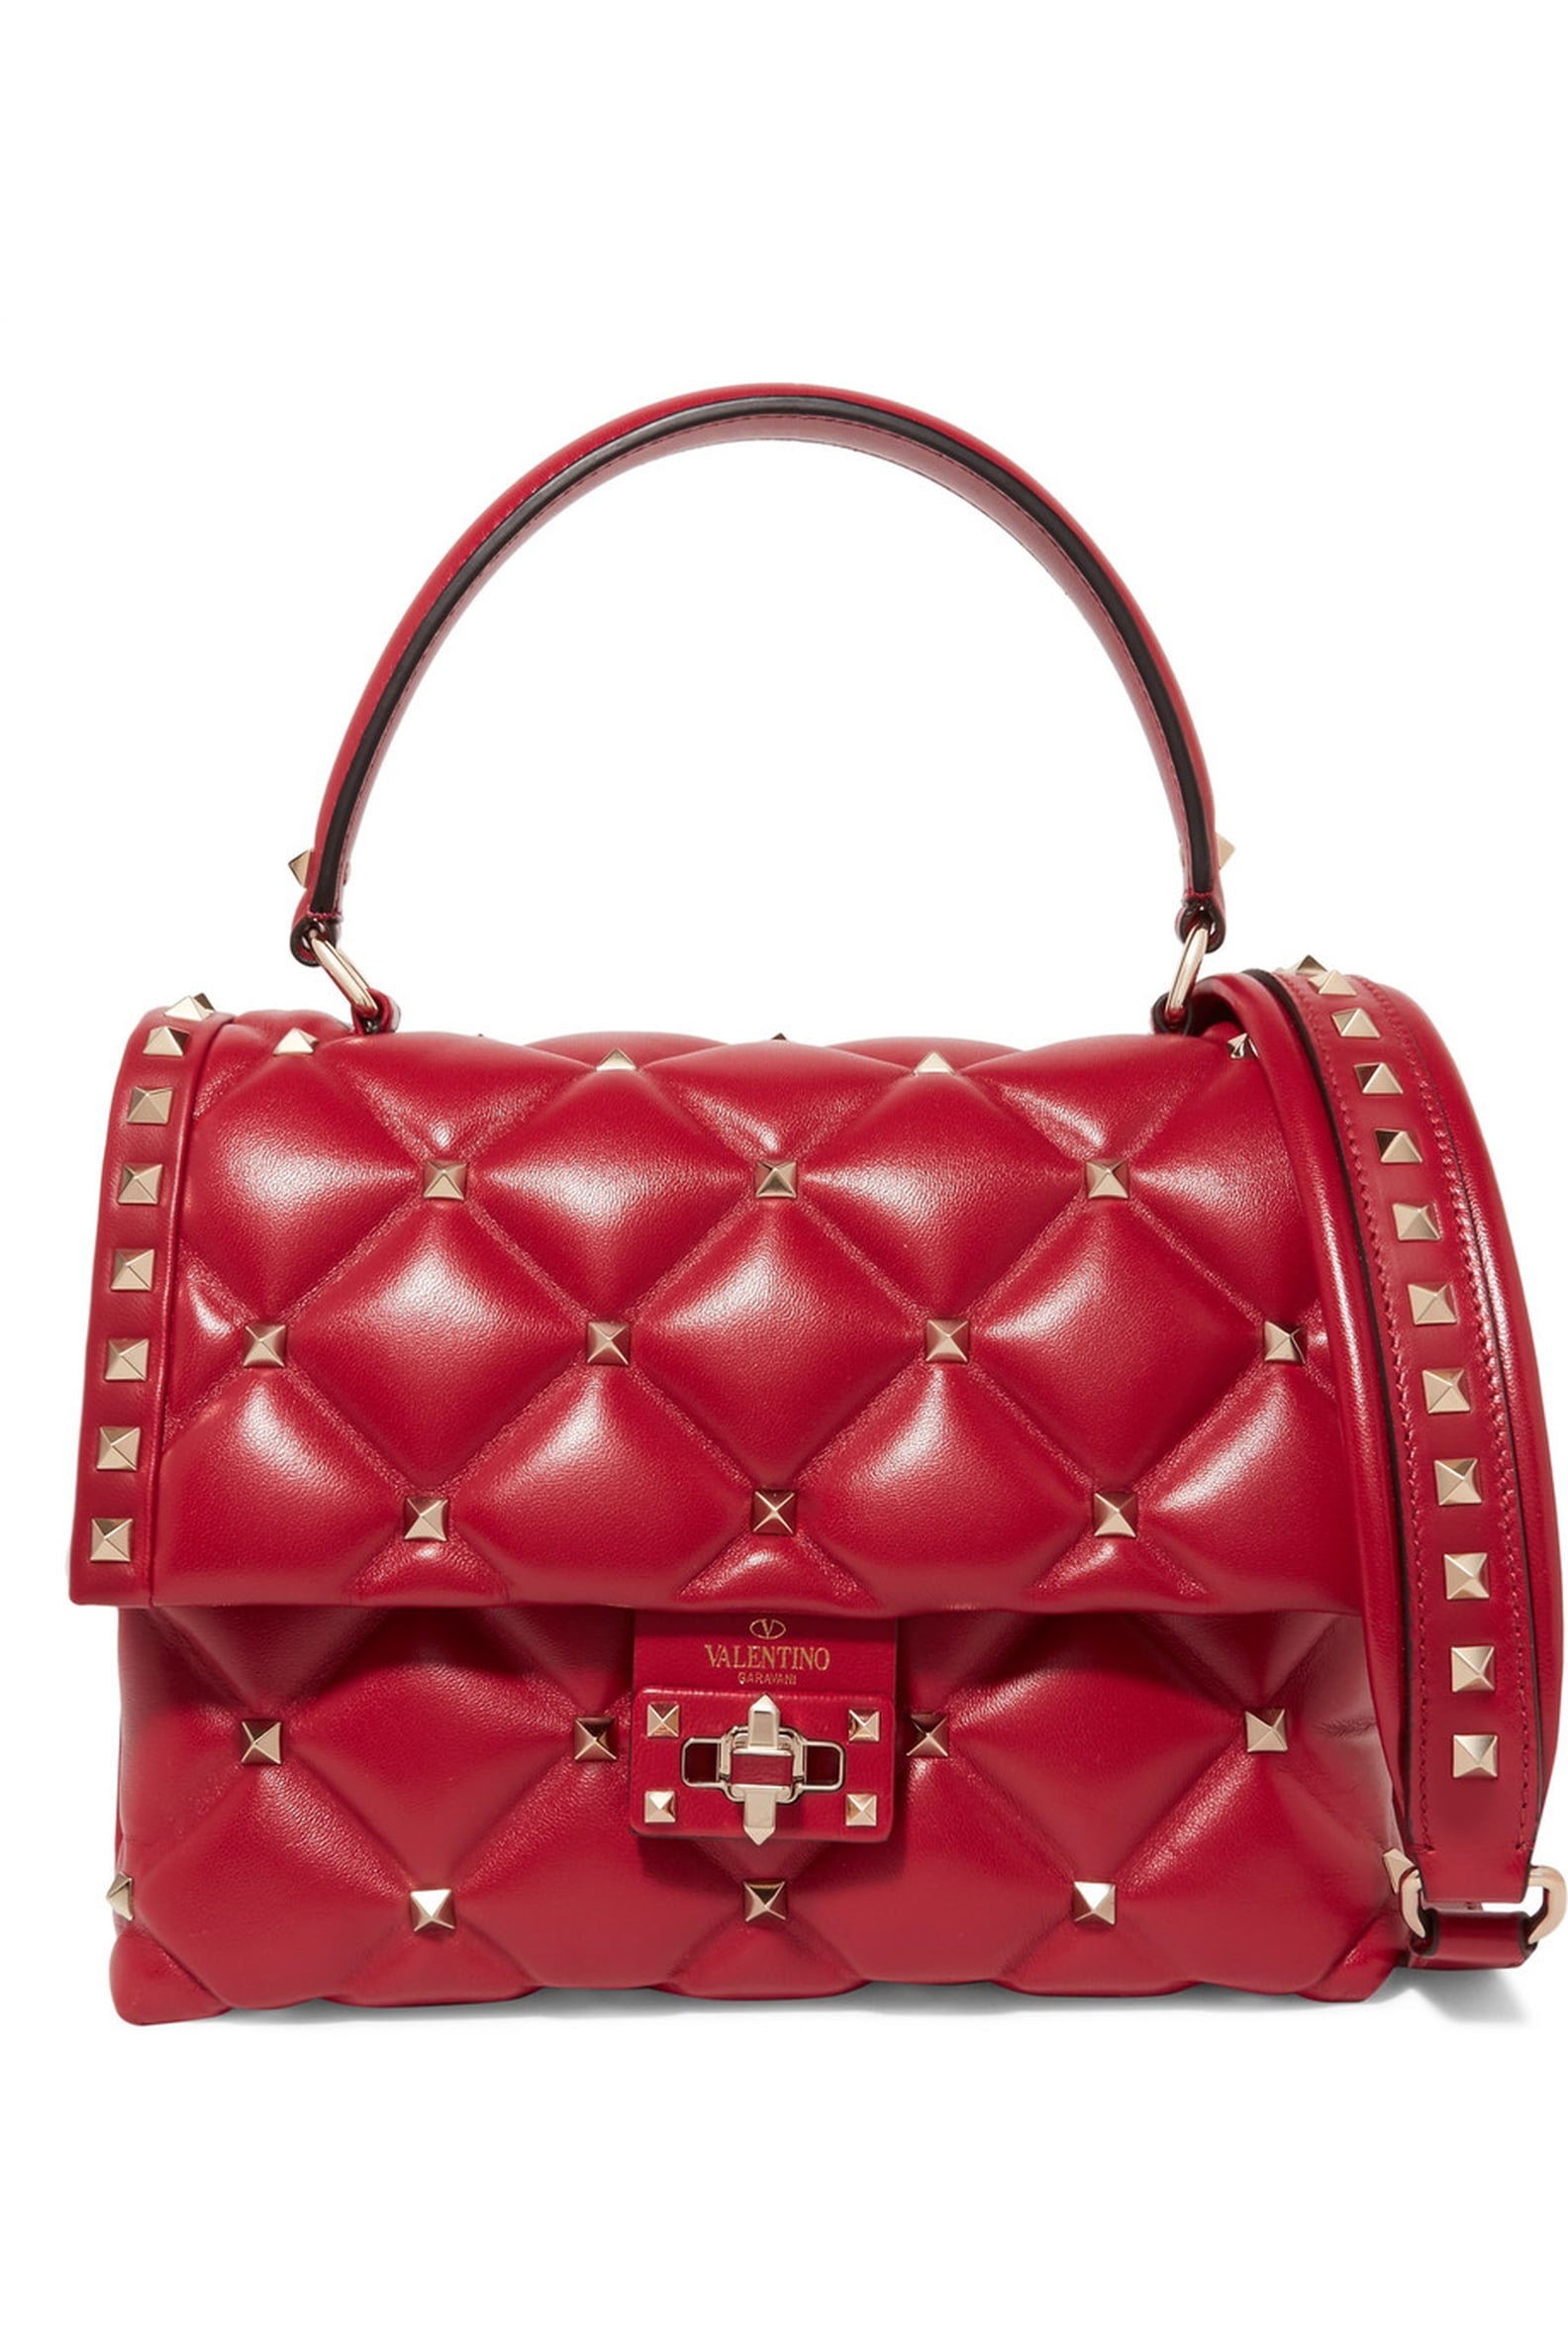 Reese Witherspoon Reese Red Valentino Bag | POPSUGAR Fashion